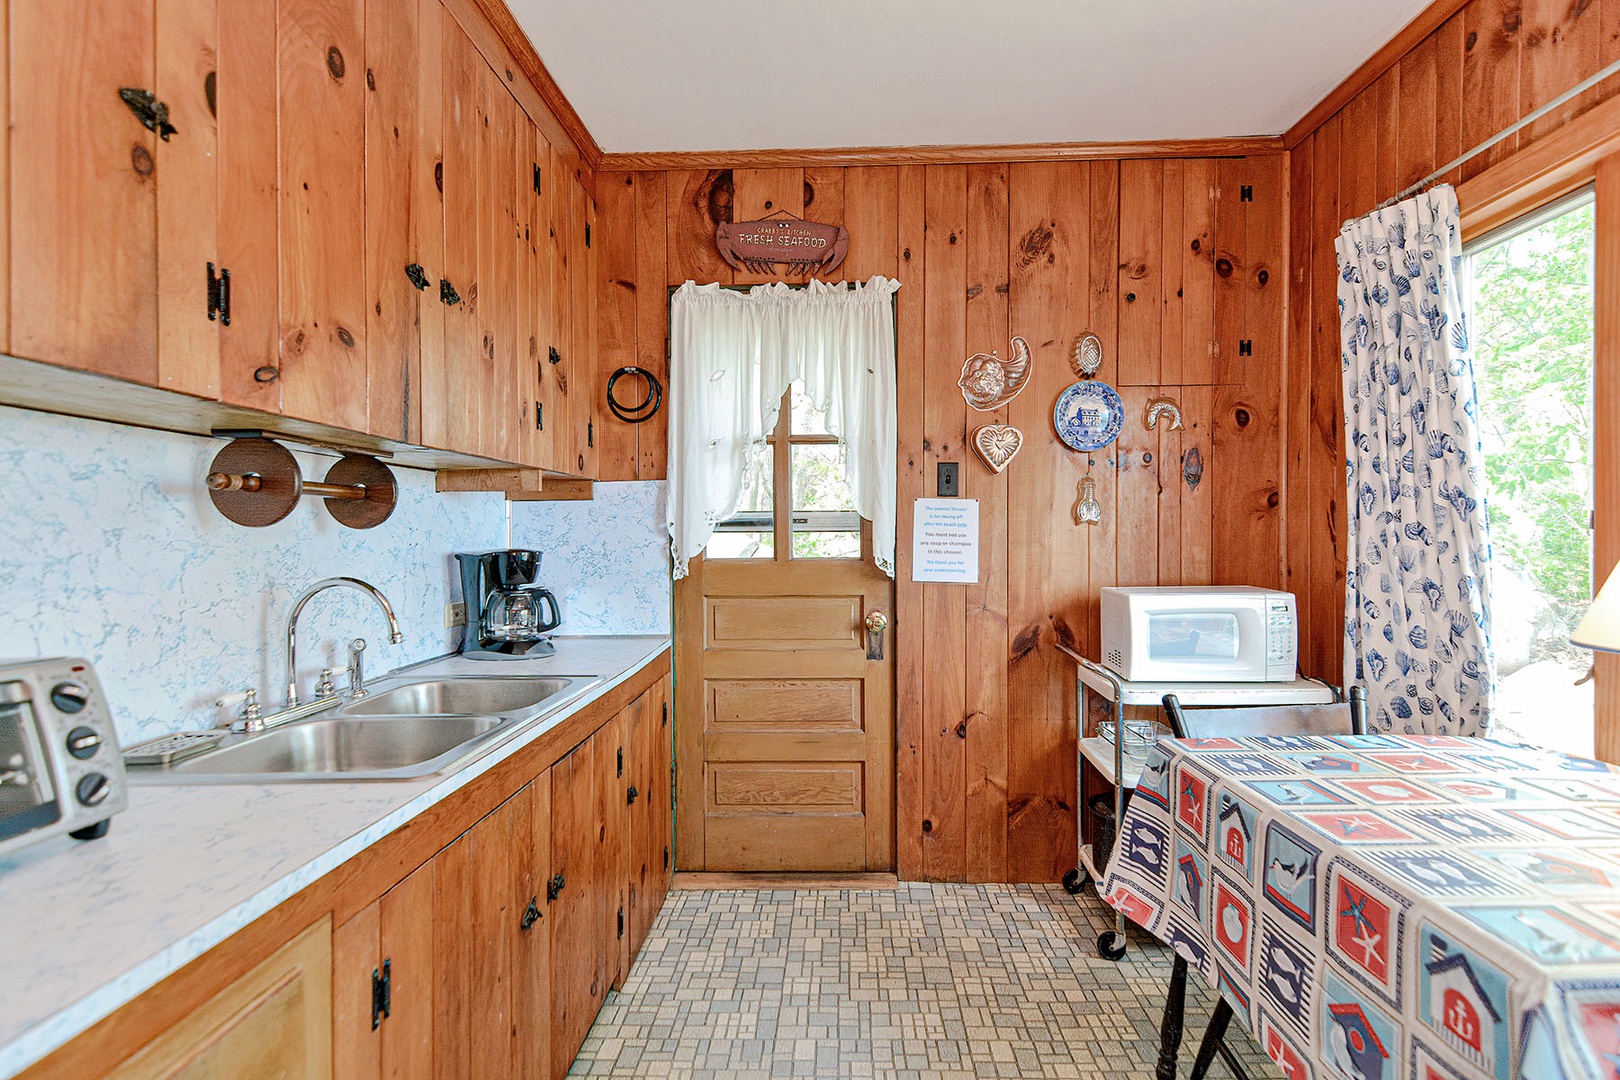 The simple cottage kitchen has pine cabinetry and paneling.